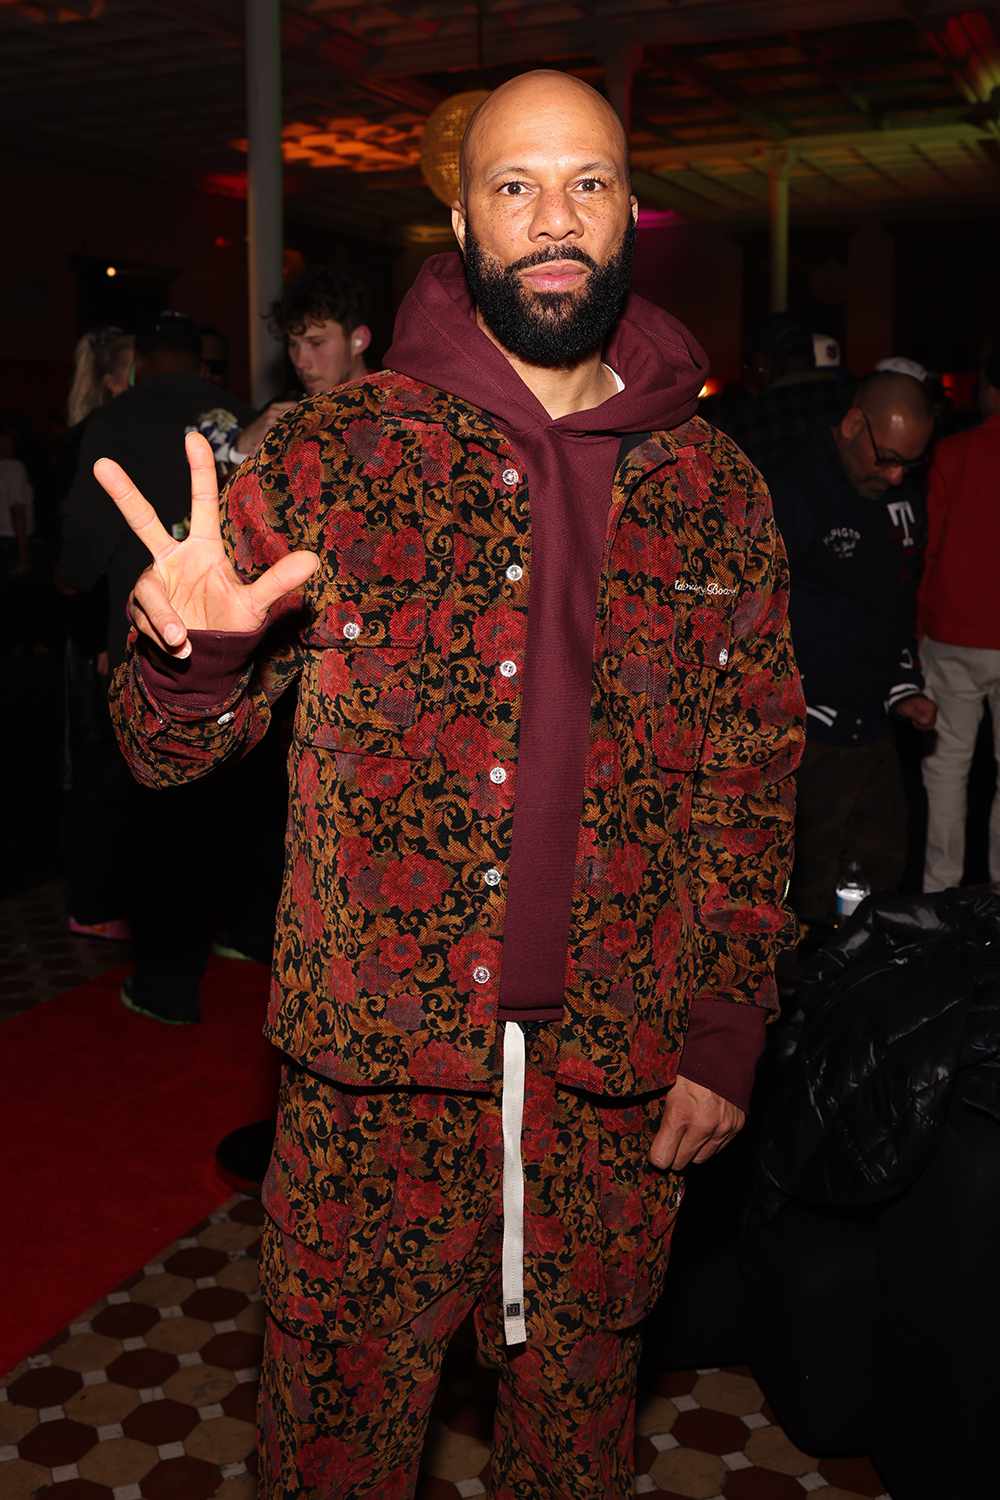 Common toasts to the end of All-Star Weekend at Grand Marnierâs All-Star Wrap Party in Indianapolis on February 18th.